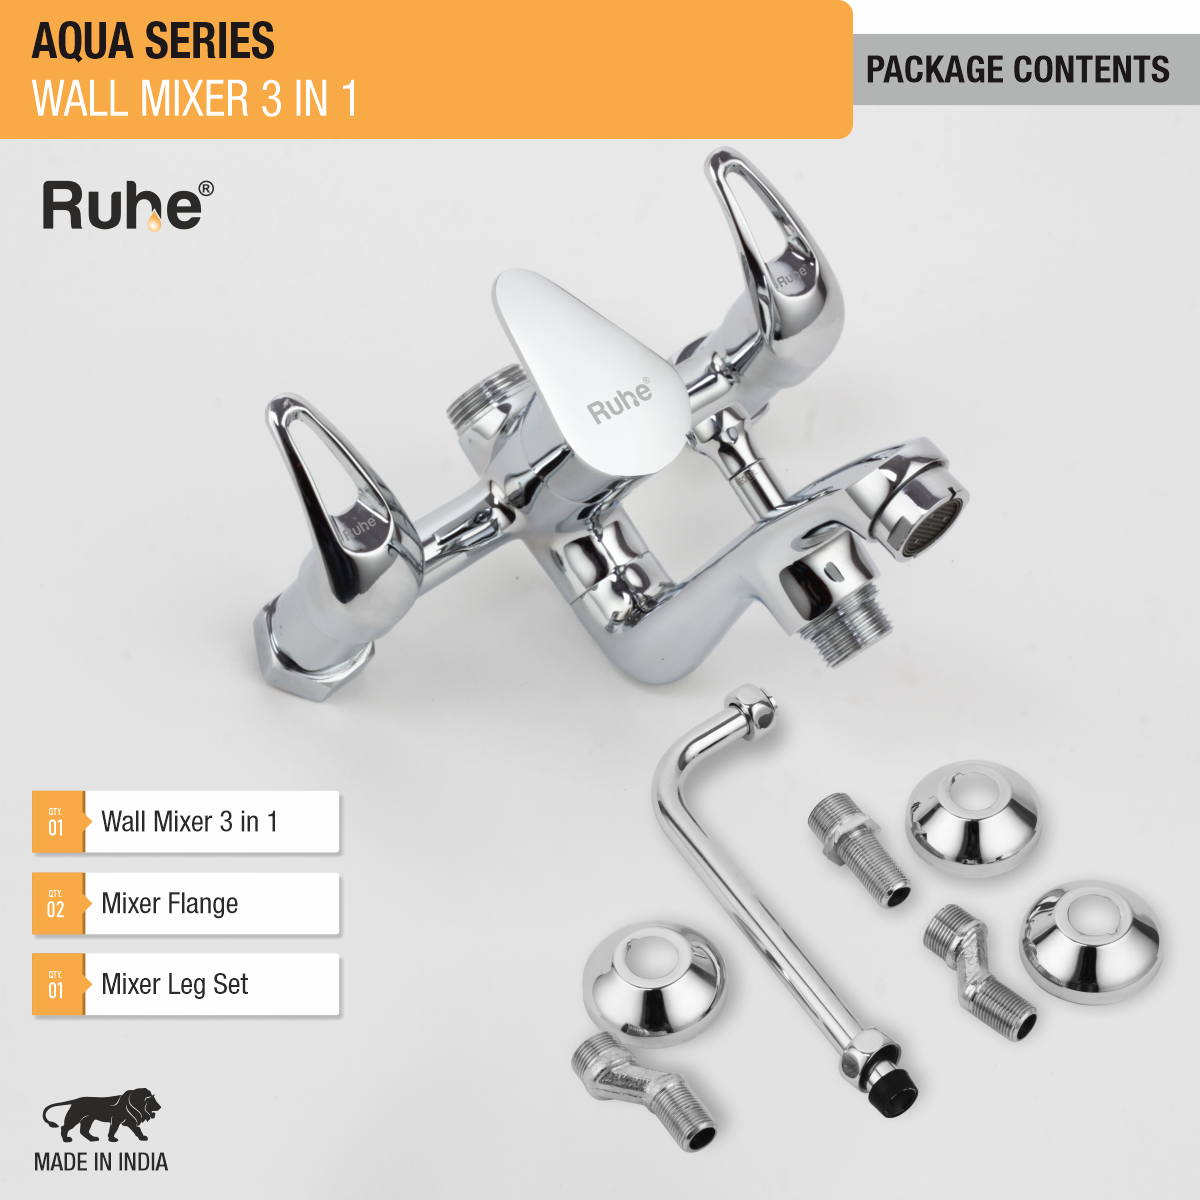 Aqua Wall Mixer 3-in-1 Brass Faucet package content